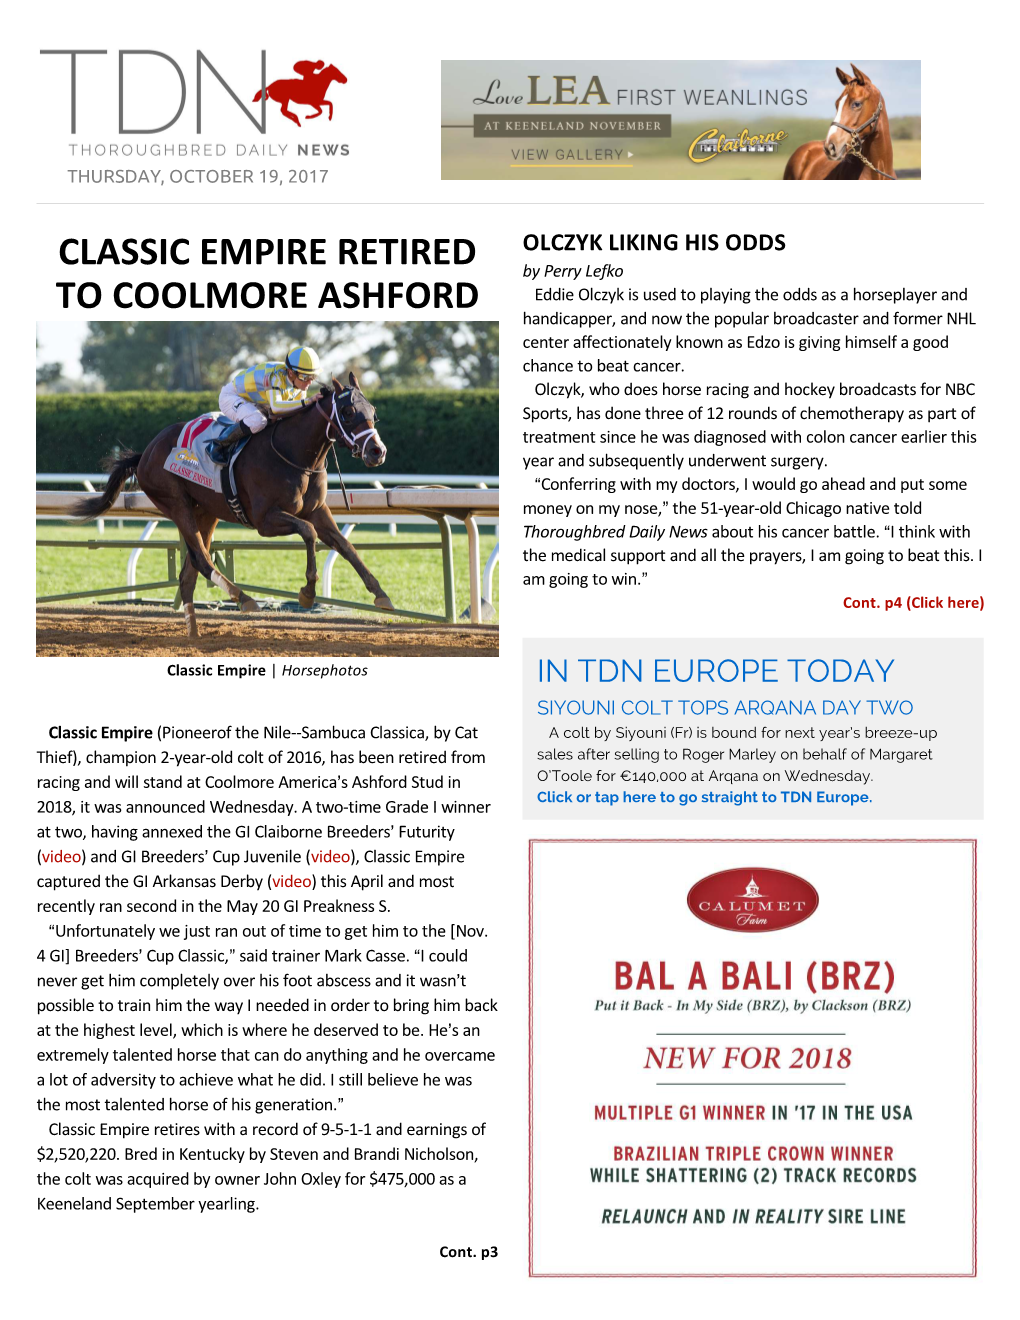 Classic Empire Retired to Coolmore Ashford